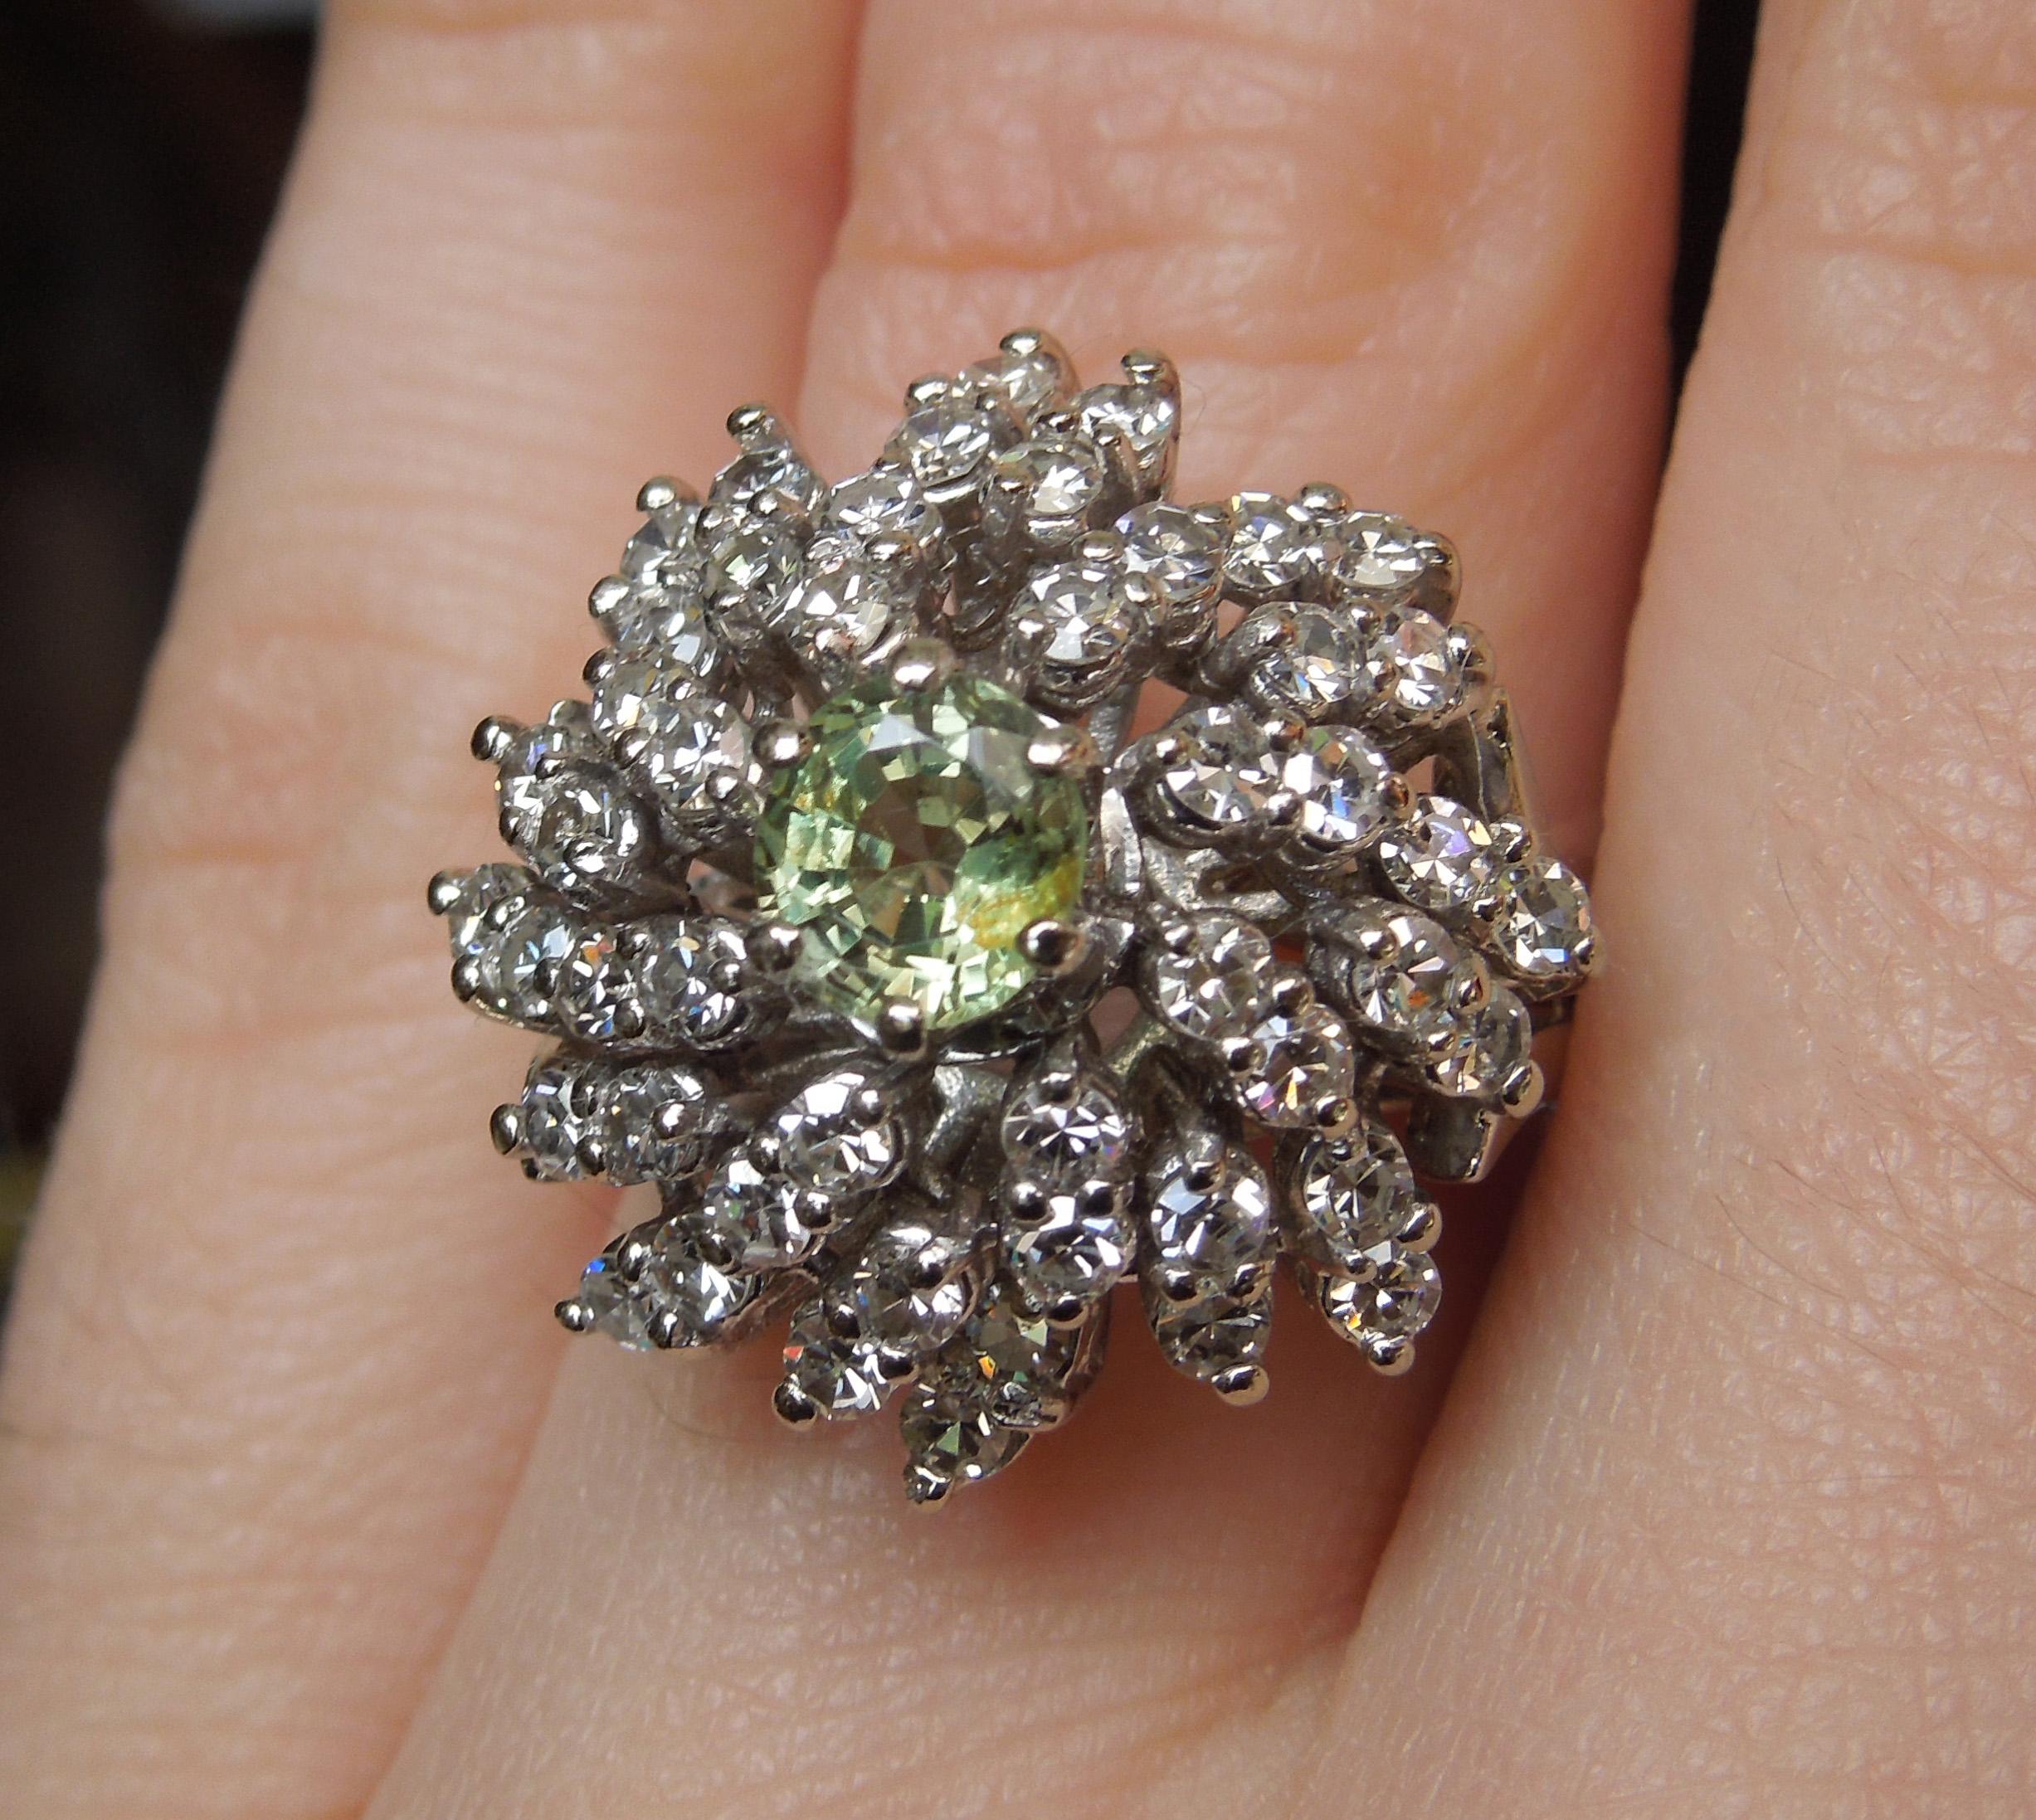 This Mid Century cocktail ring features a central Round cut Natural Light Chameleon Green Alexandrite weighing approximately 0.90 carats measuring 6mm in diameter secured in six prongs, surrounded by 48 Colorless Nearly Flawless Single cut Diamonds